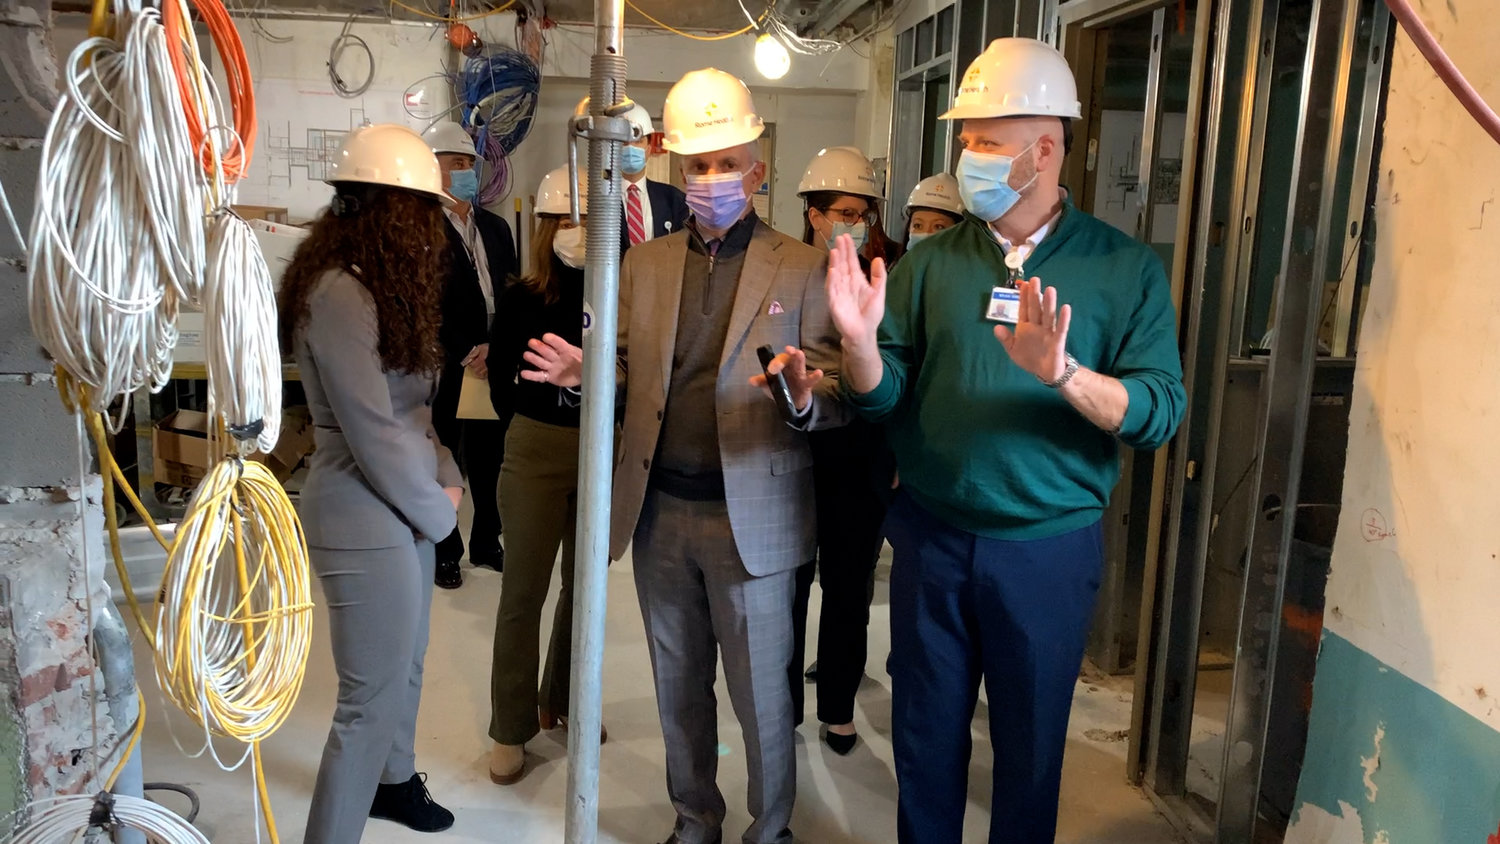 Ryan Thompson, vice-president/COO of Rome Health, giving a tour of the Women’s Surgical Suite to County Executive Anthony J. Picente Jr. The suite, which is under construction now, is planned to be completed in the spring.